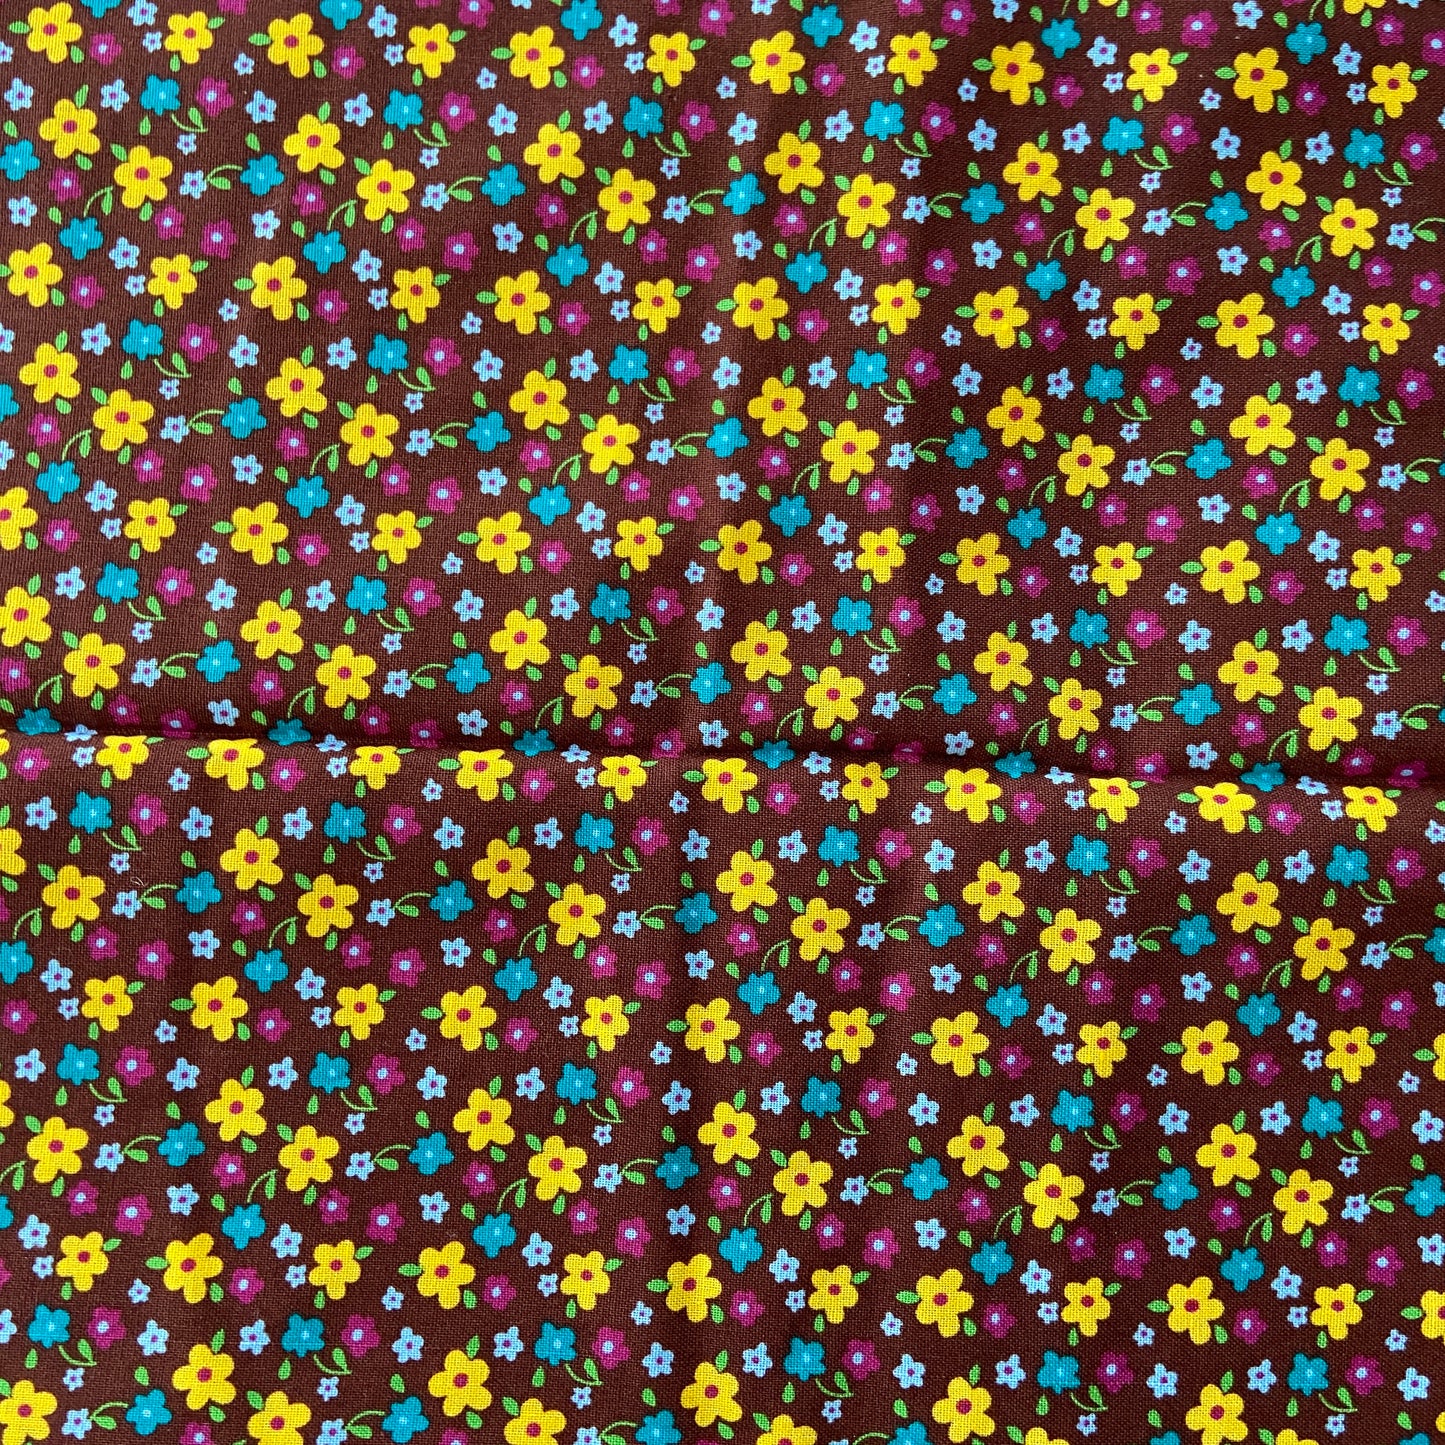 Modern FAT QUARTER High Quality New Cotton Fabric FLORAL Print Quilting